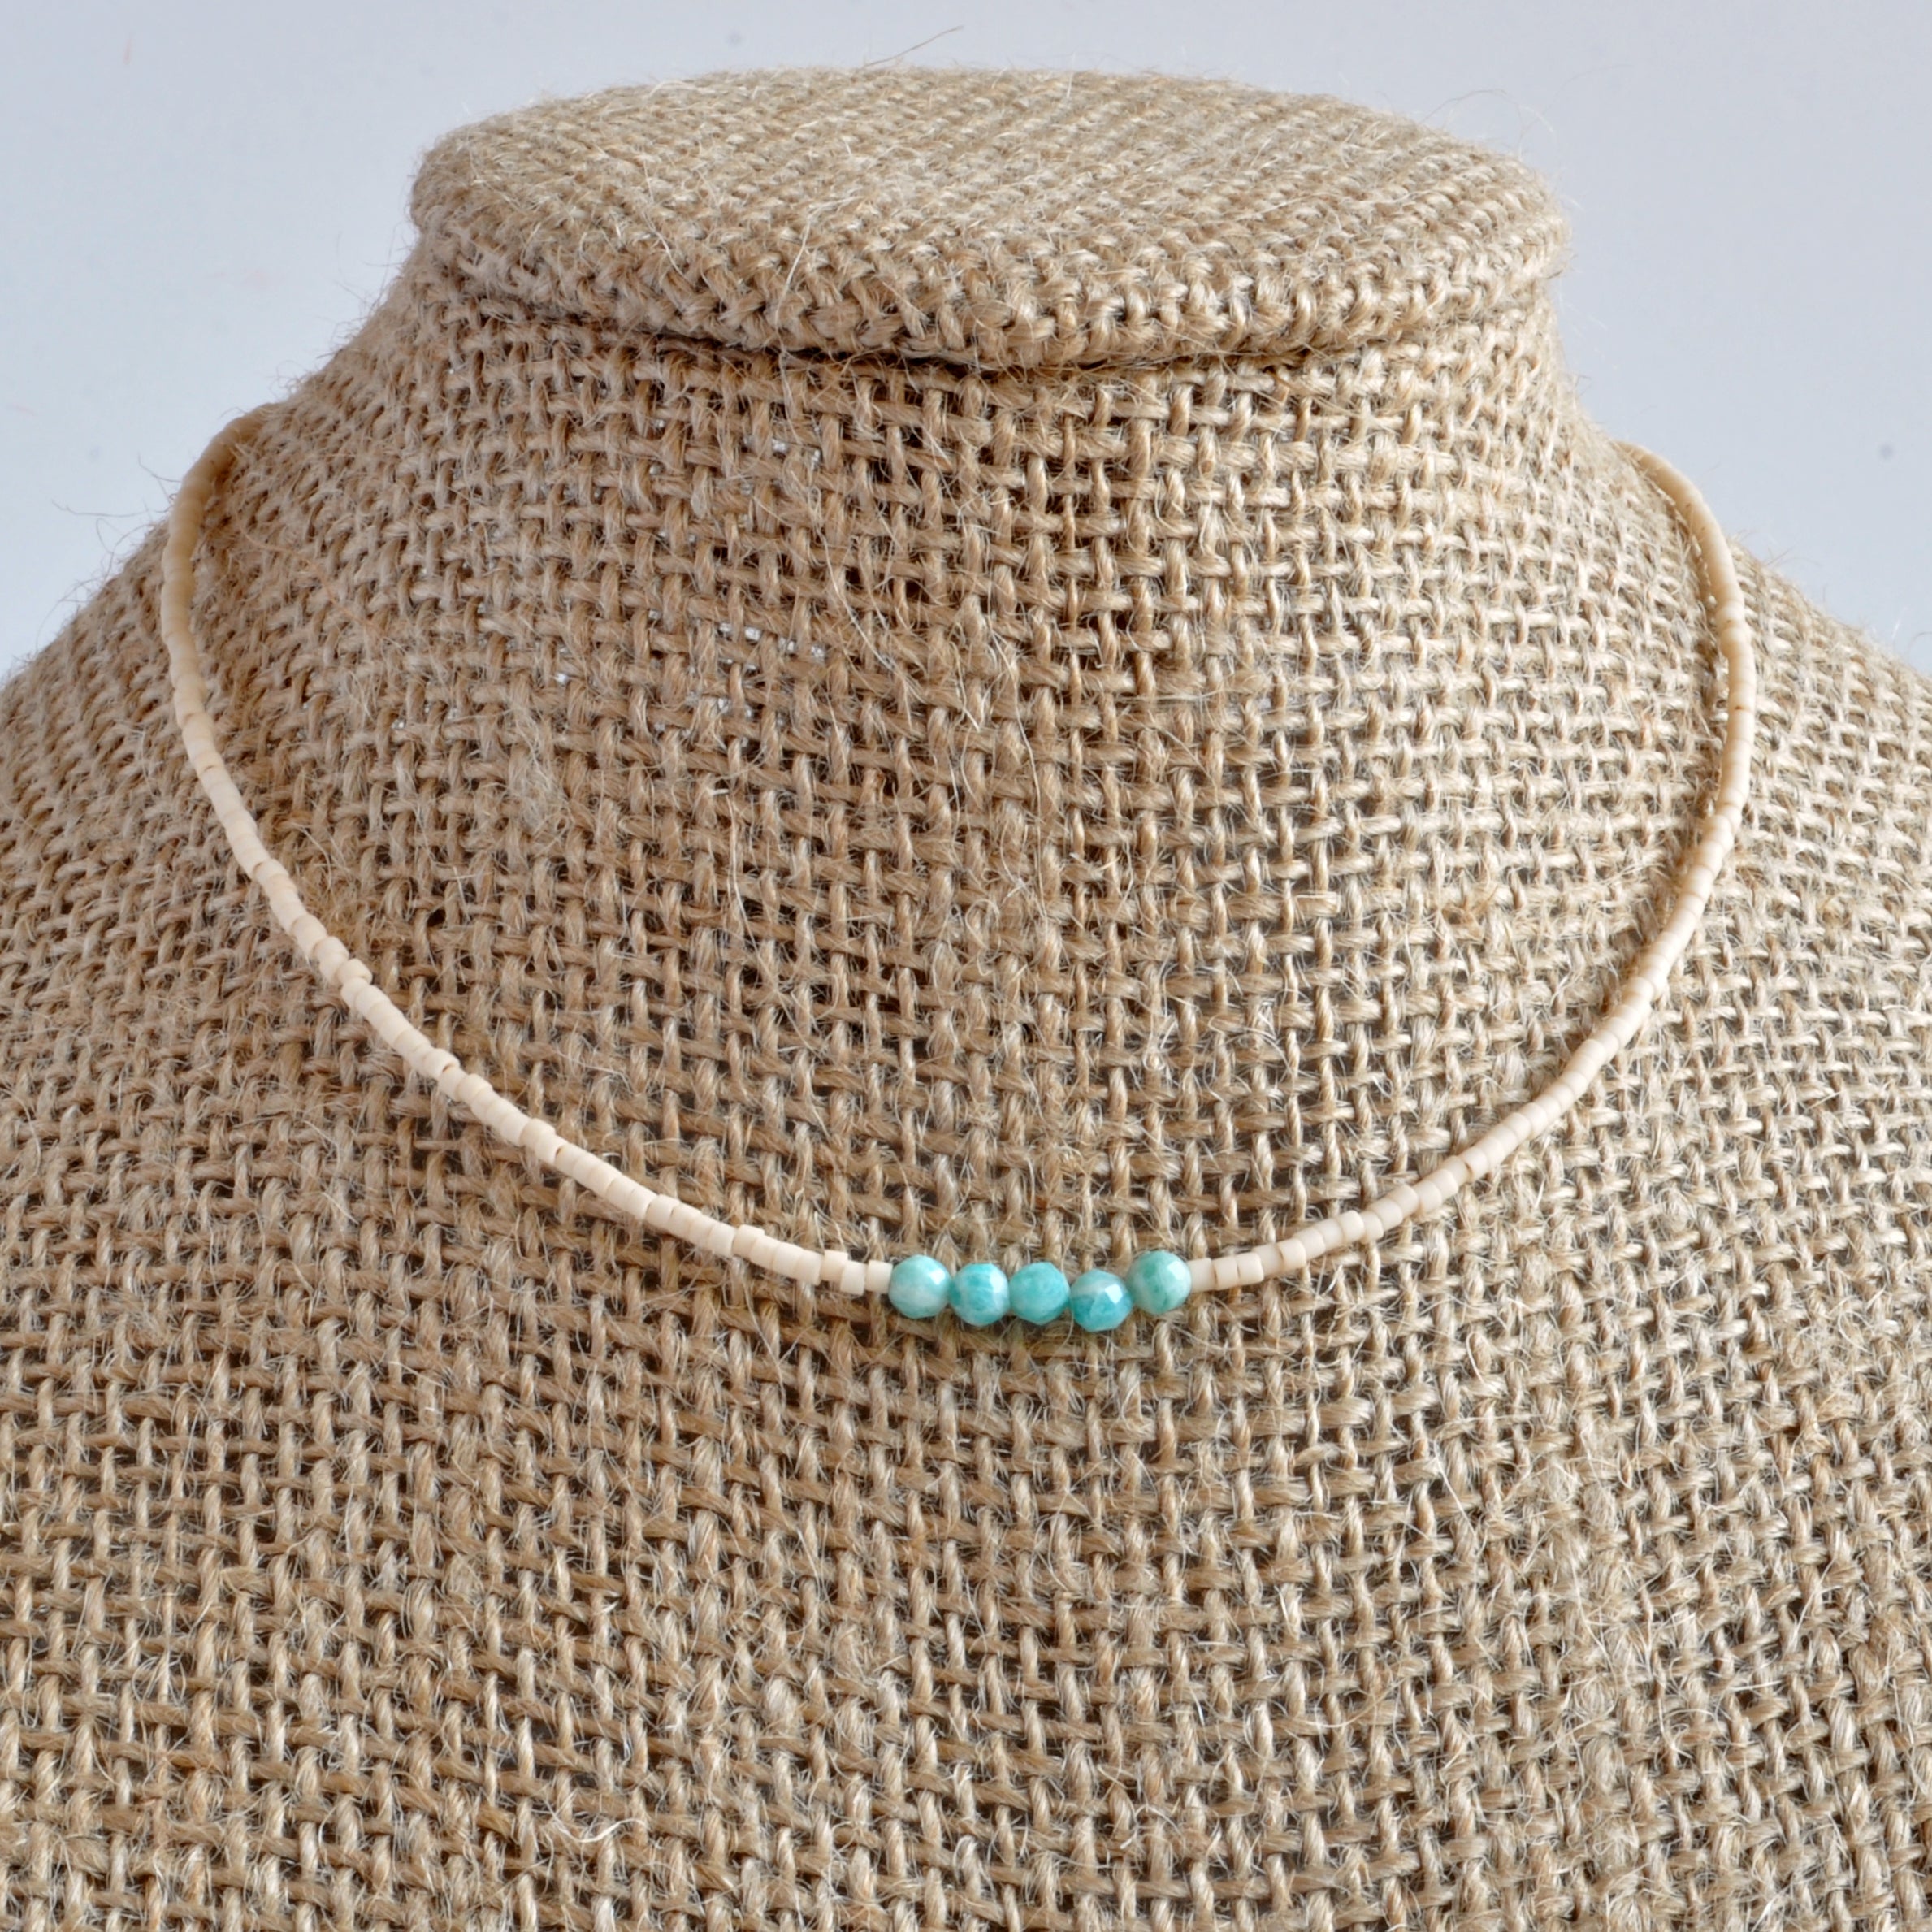 Libby & Smee matte cream beaded choker necklace with turquoise Amazonite accent beads on mannequin